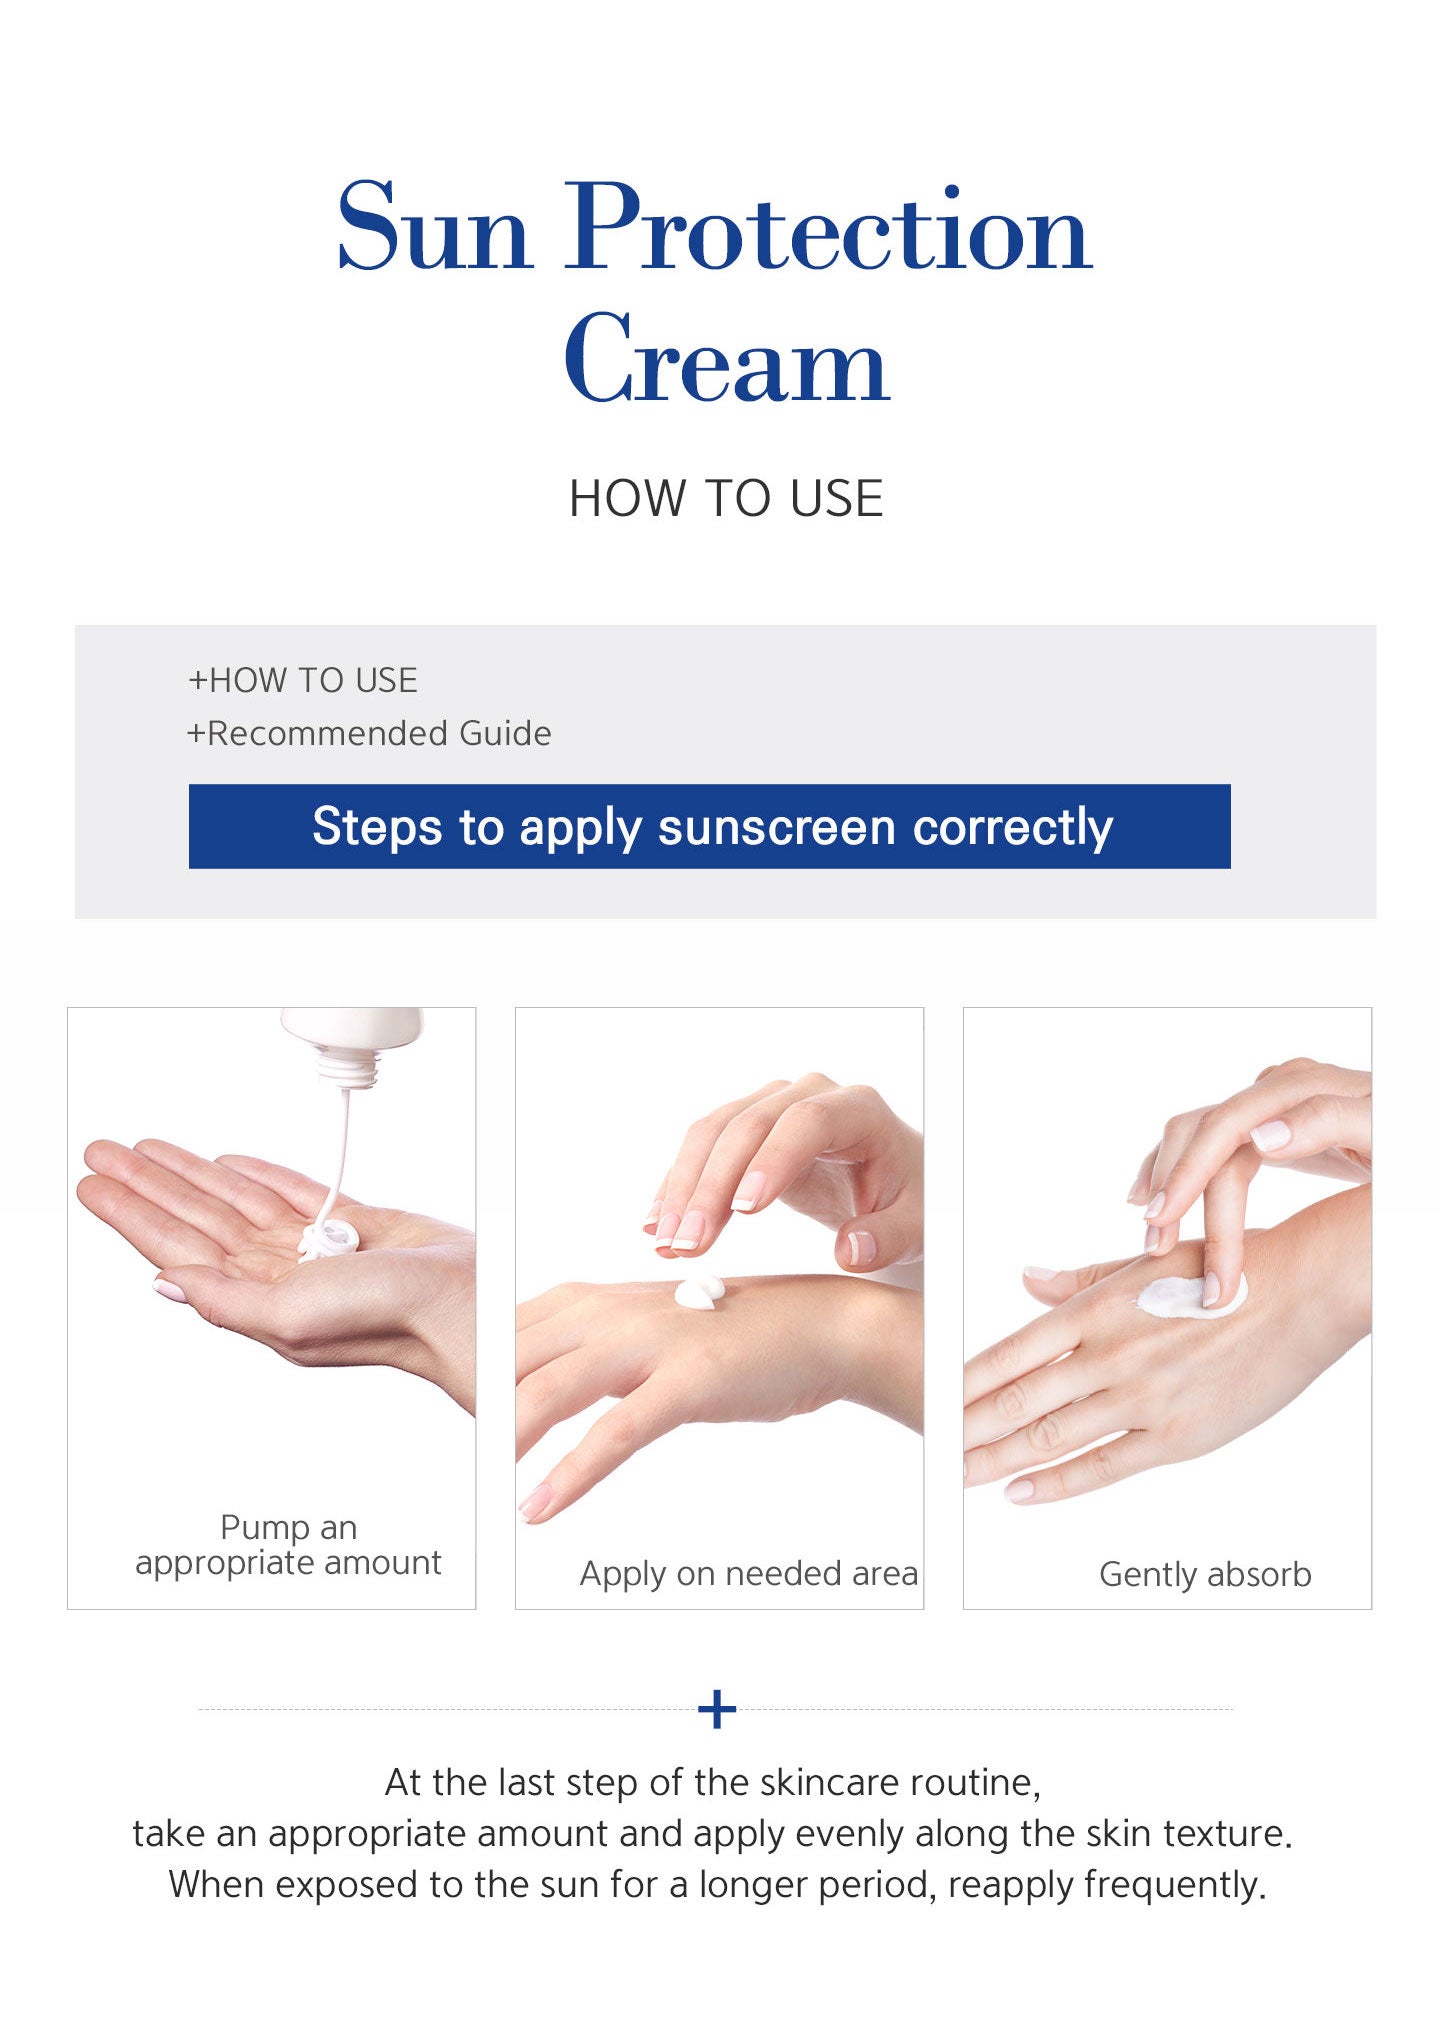 How to use sun protection cream? Pump an appropriate amount, apply on needed area and gently absorb. At the last step of the skincare routine, take an appropriate amount and apply evenly along the skin texture. When exposed to the sun for a longer period